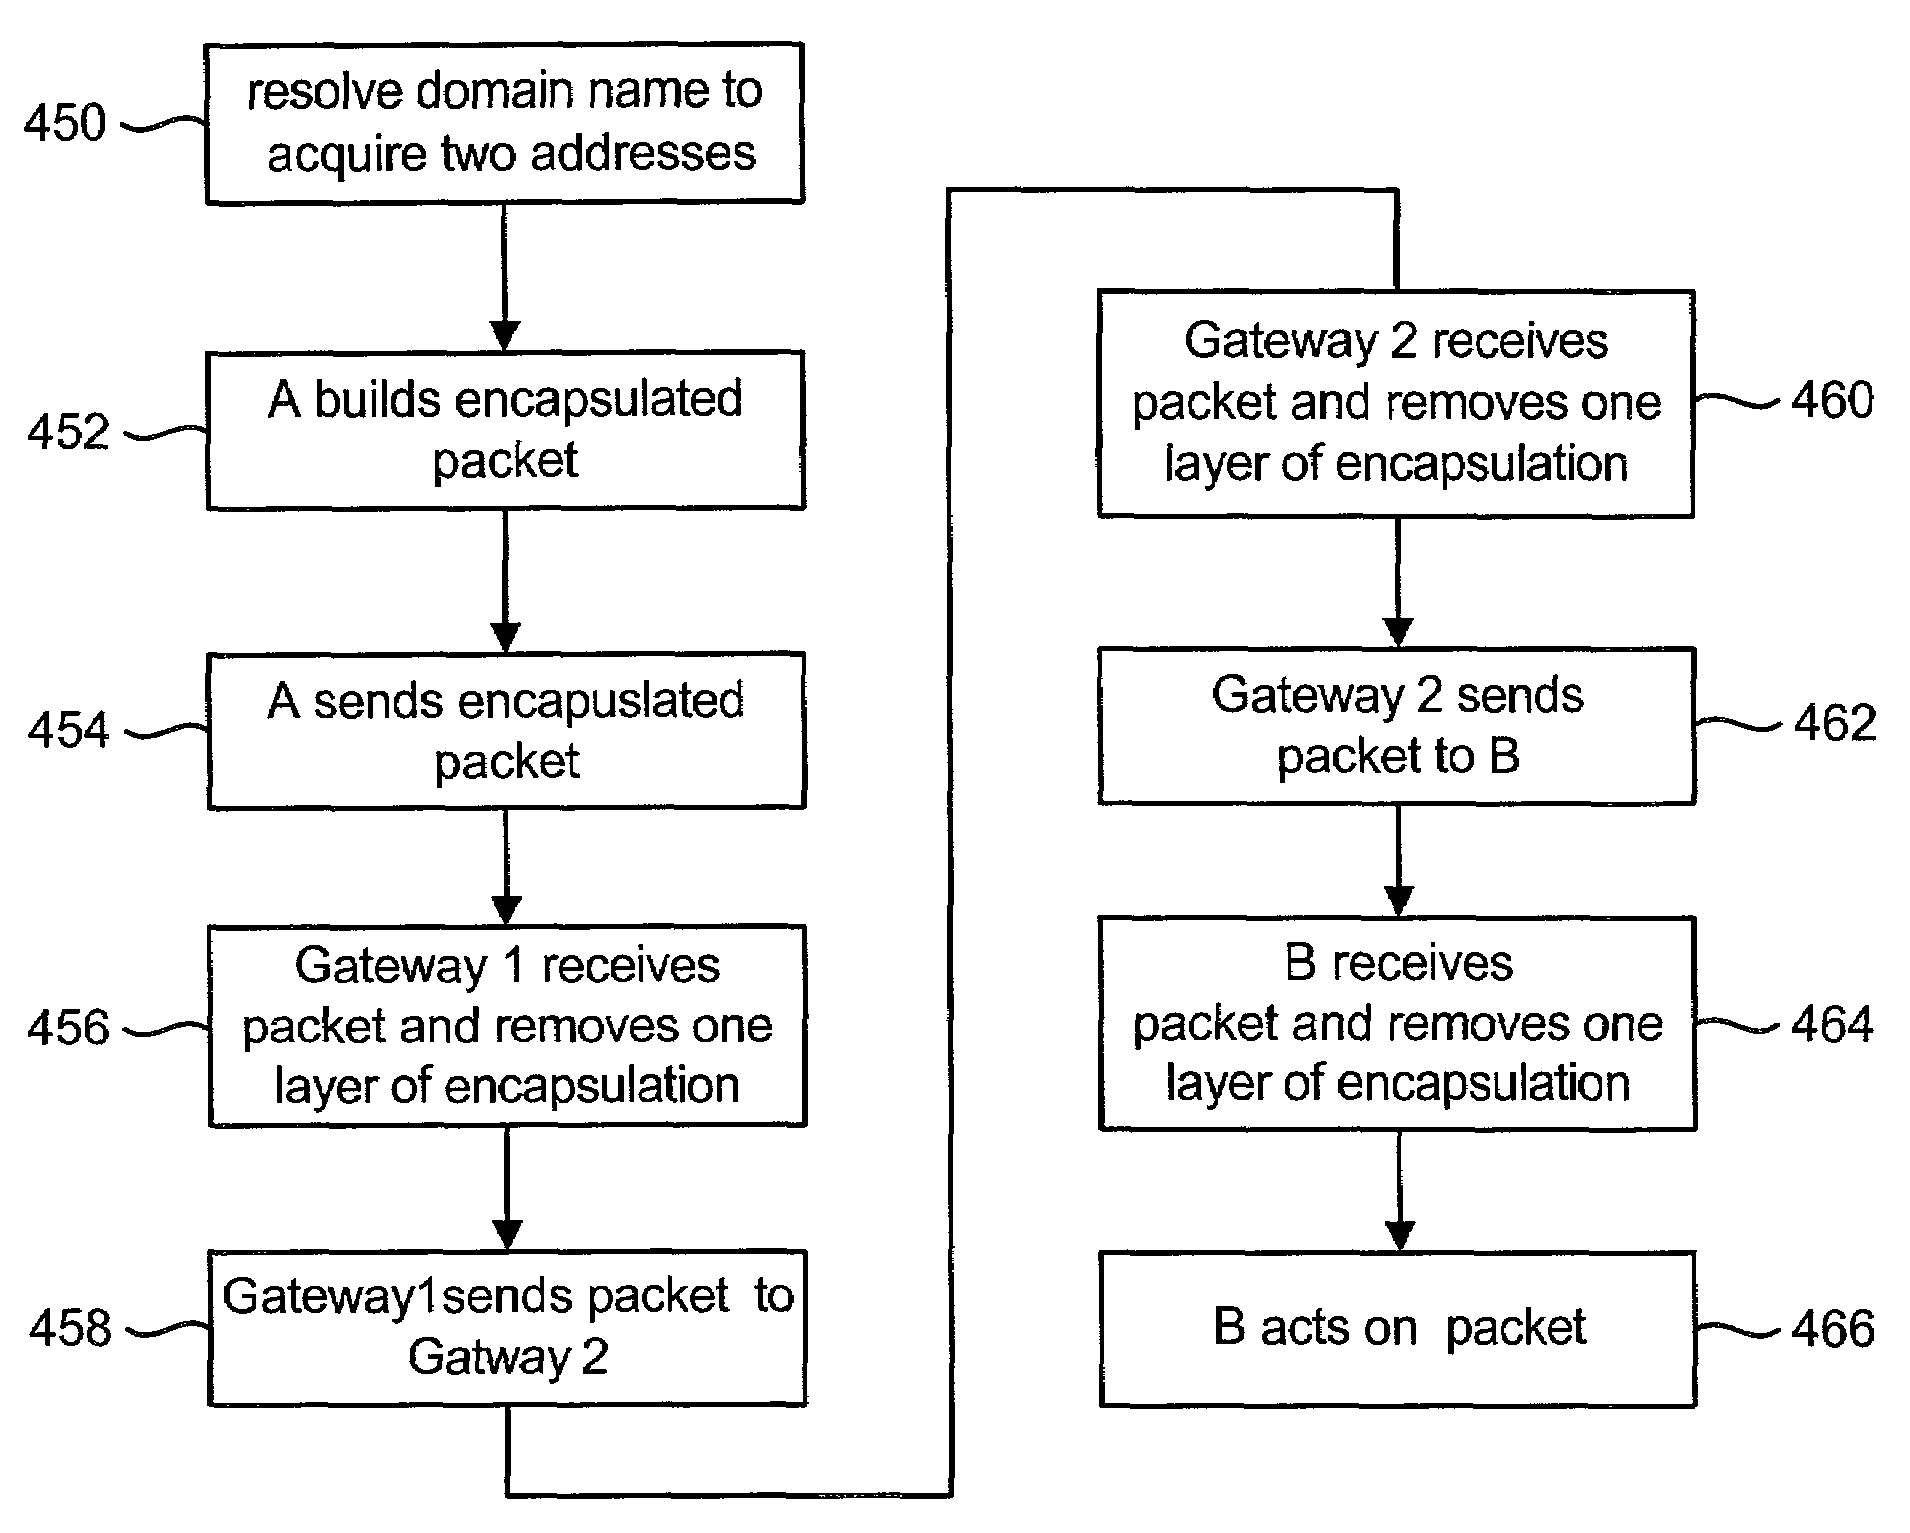 Communication using two addresses for an entity